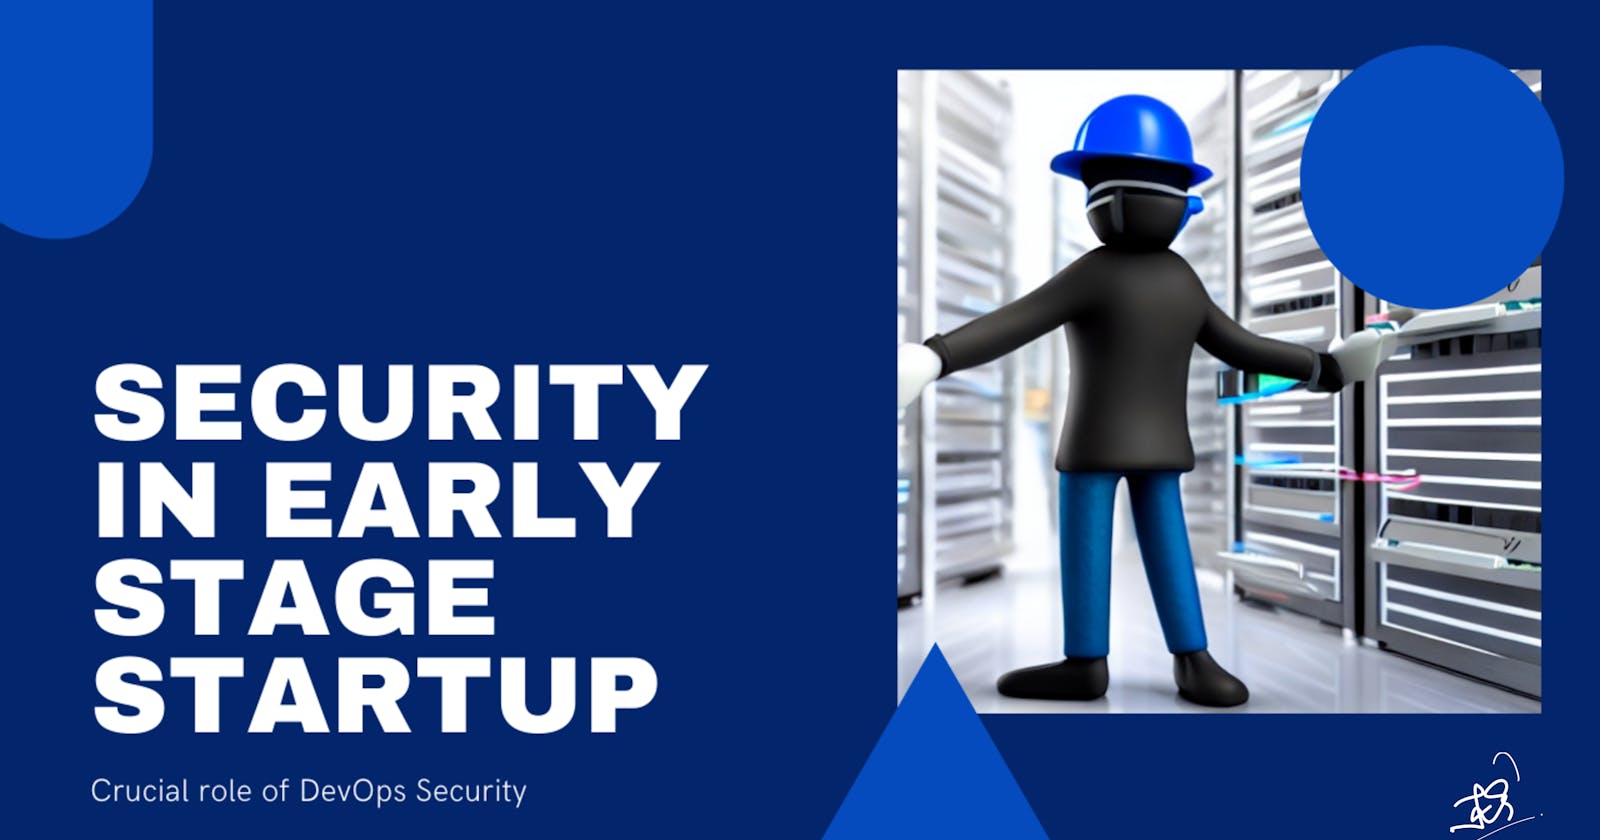 The Crucial Role of DevOps Security in the Success of Early-Stage Startups